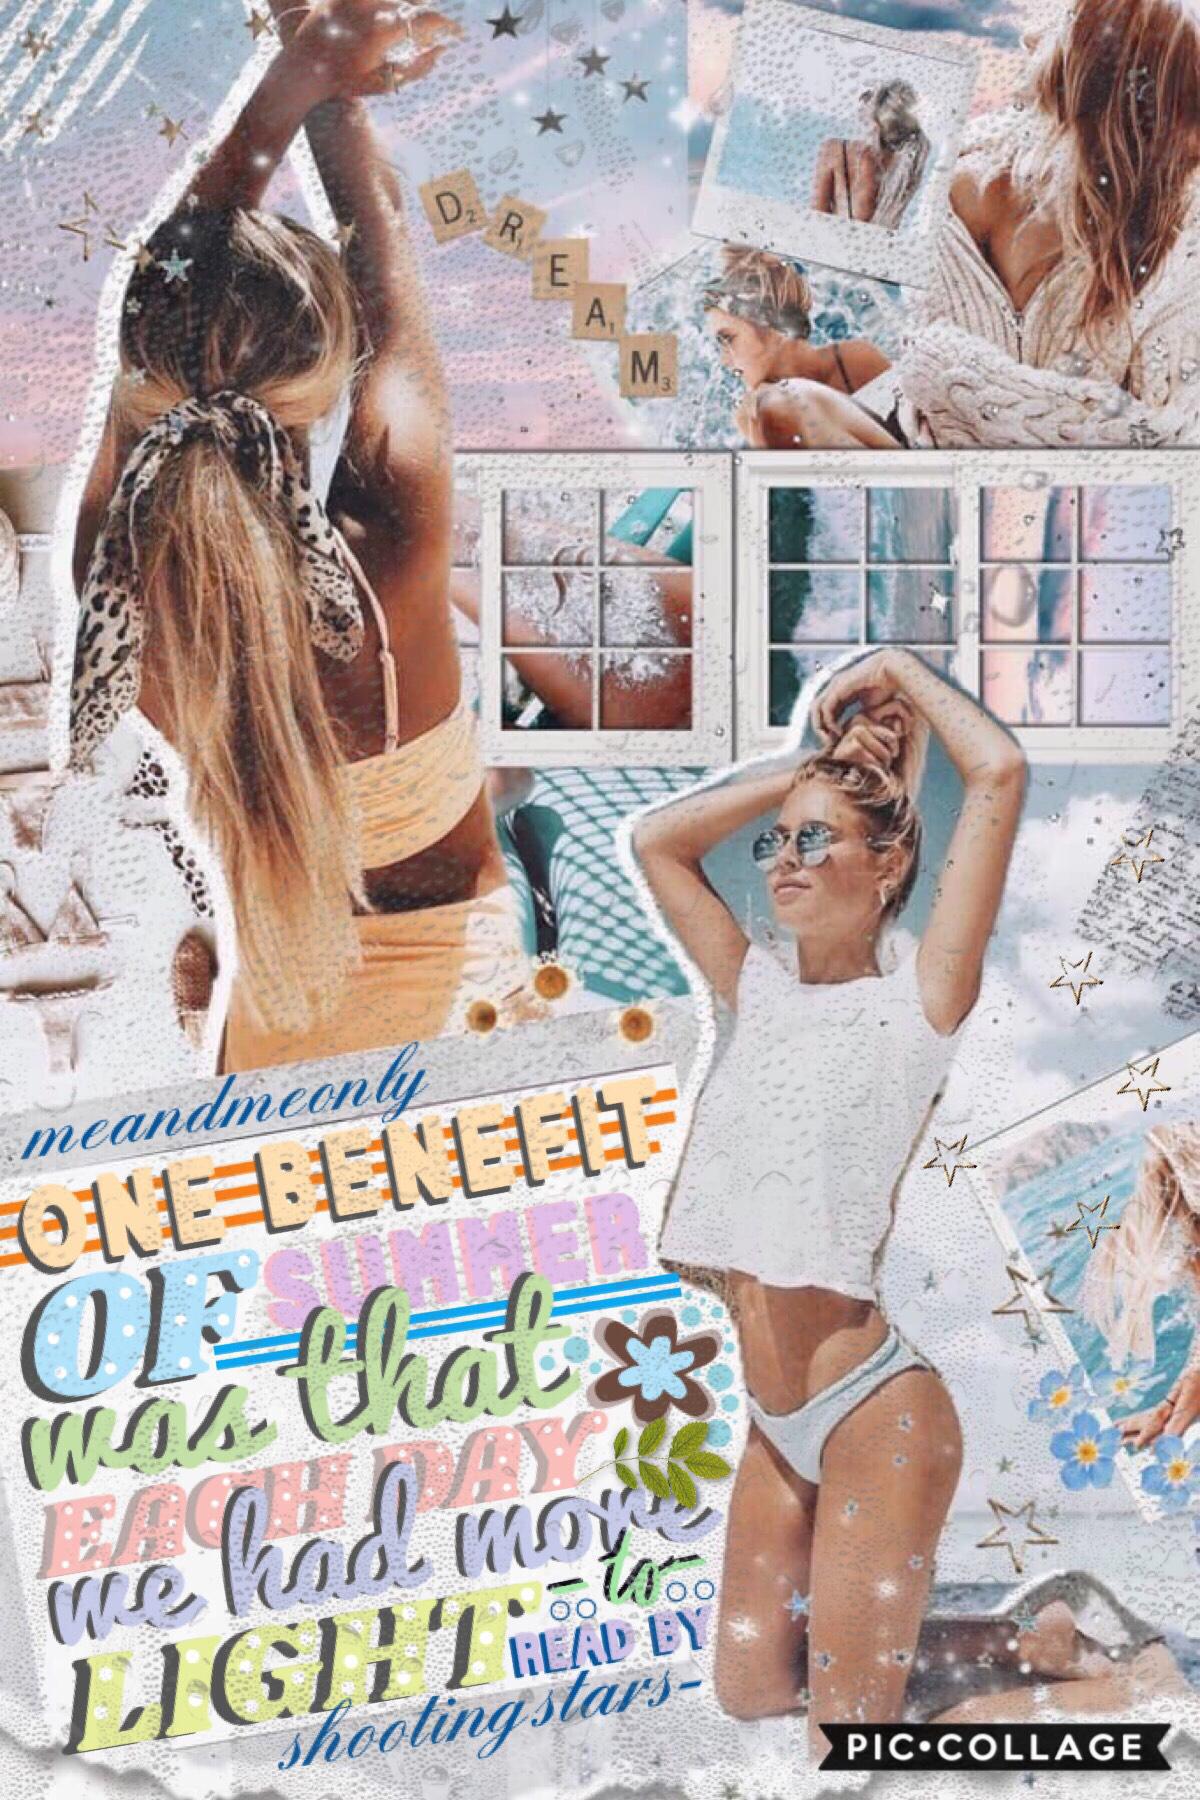 collab with the awesome Enya💓@meandmeonly y’all should go follow her right now cause she one of the best users on Piccollage!!!✨💫🌿comment down below if I should change my icon or not AND if you wanna collab with me🌸☀️also go enter the SUMMER GAMES on @cle